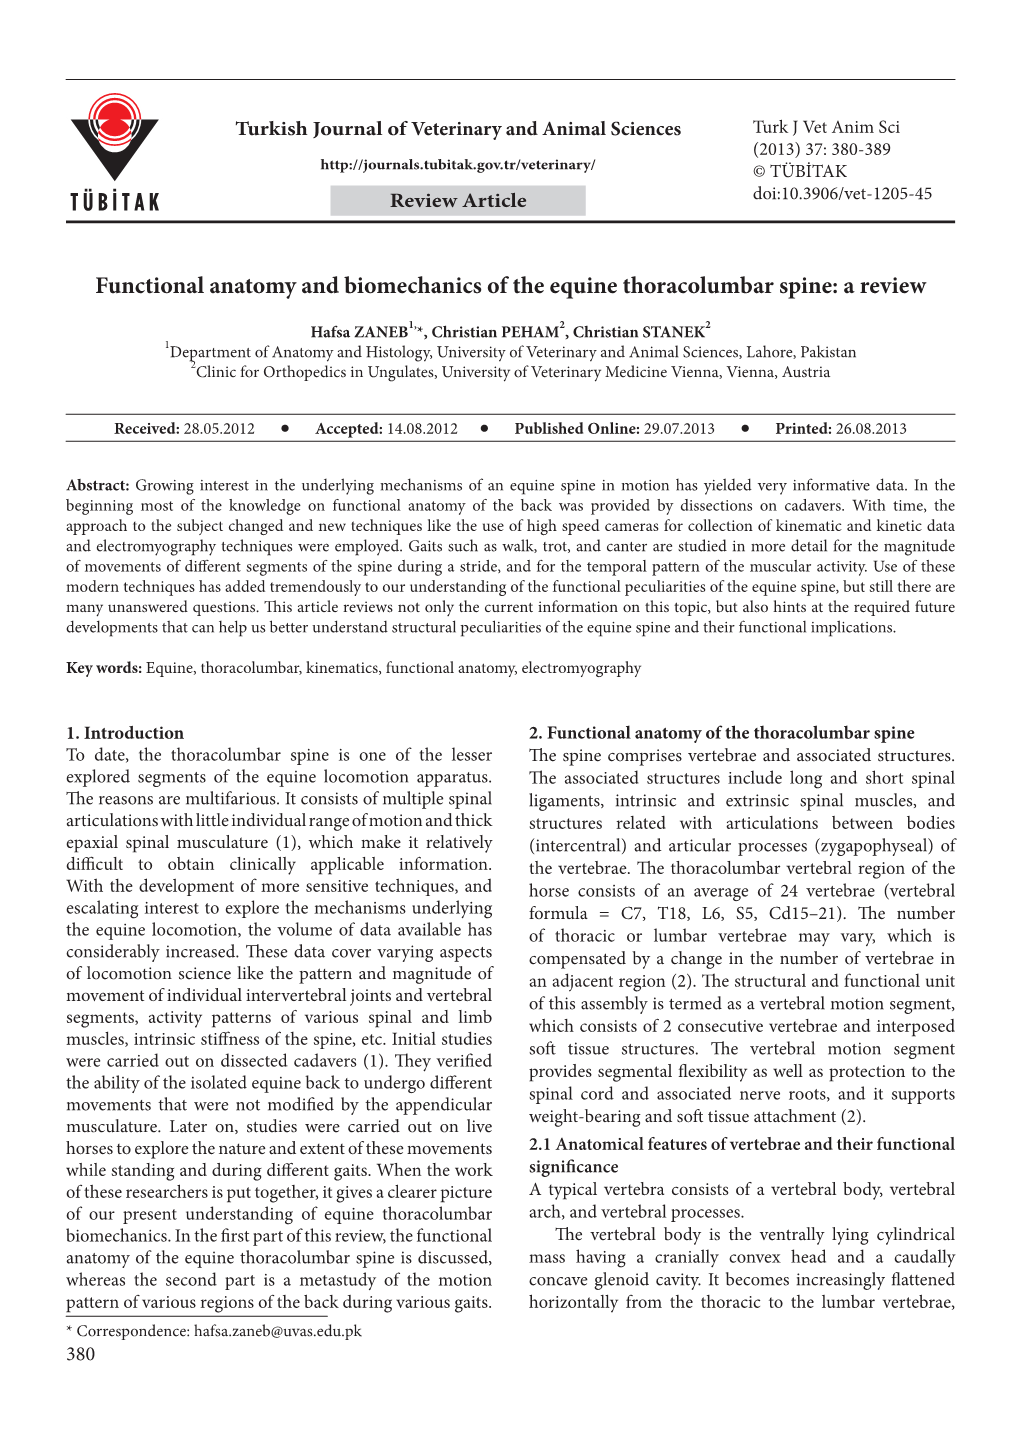 Functional Anatomy and Biomechanics of the Equine Thoracolumbar Spine: a Review